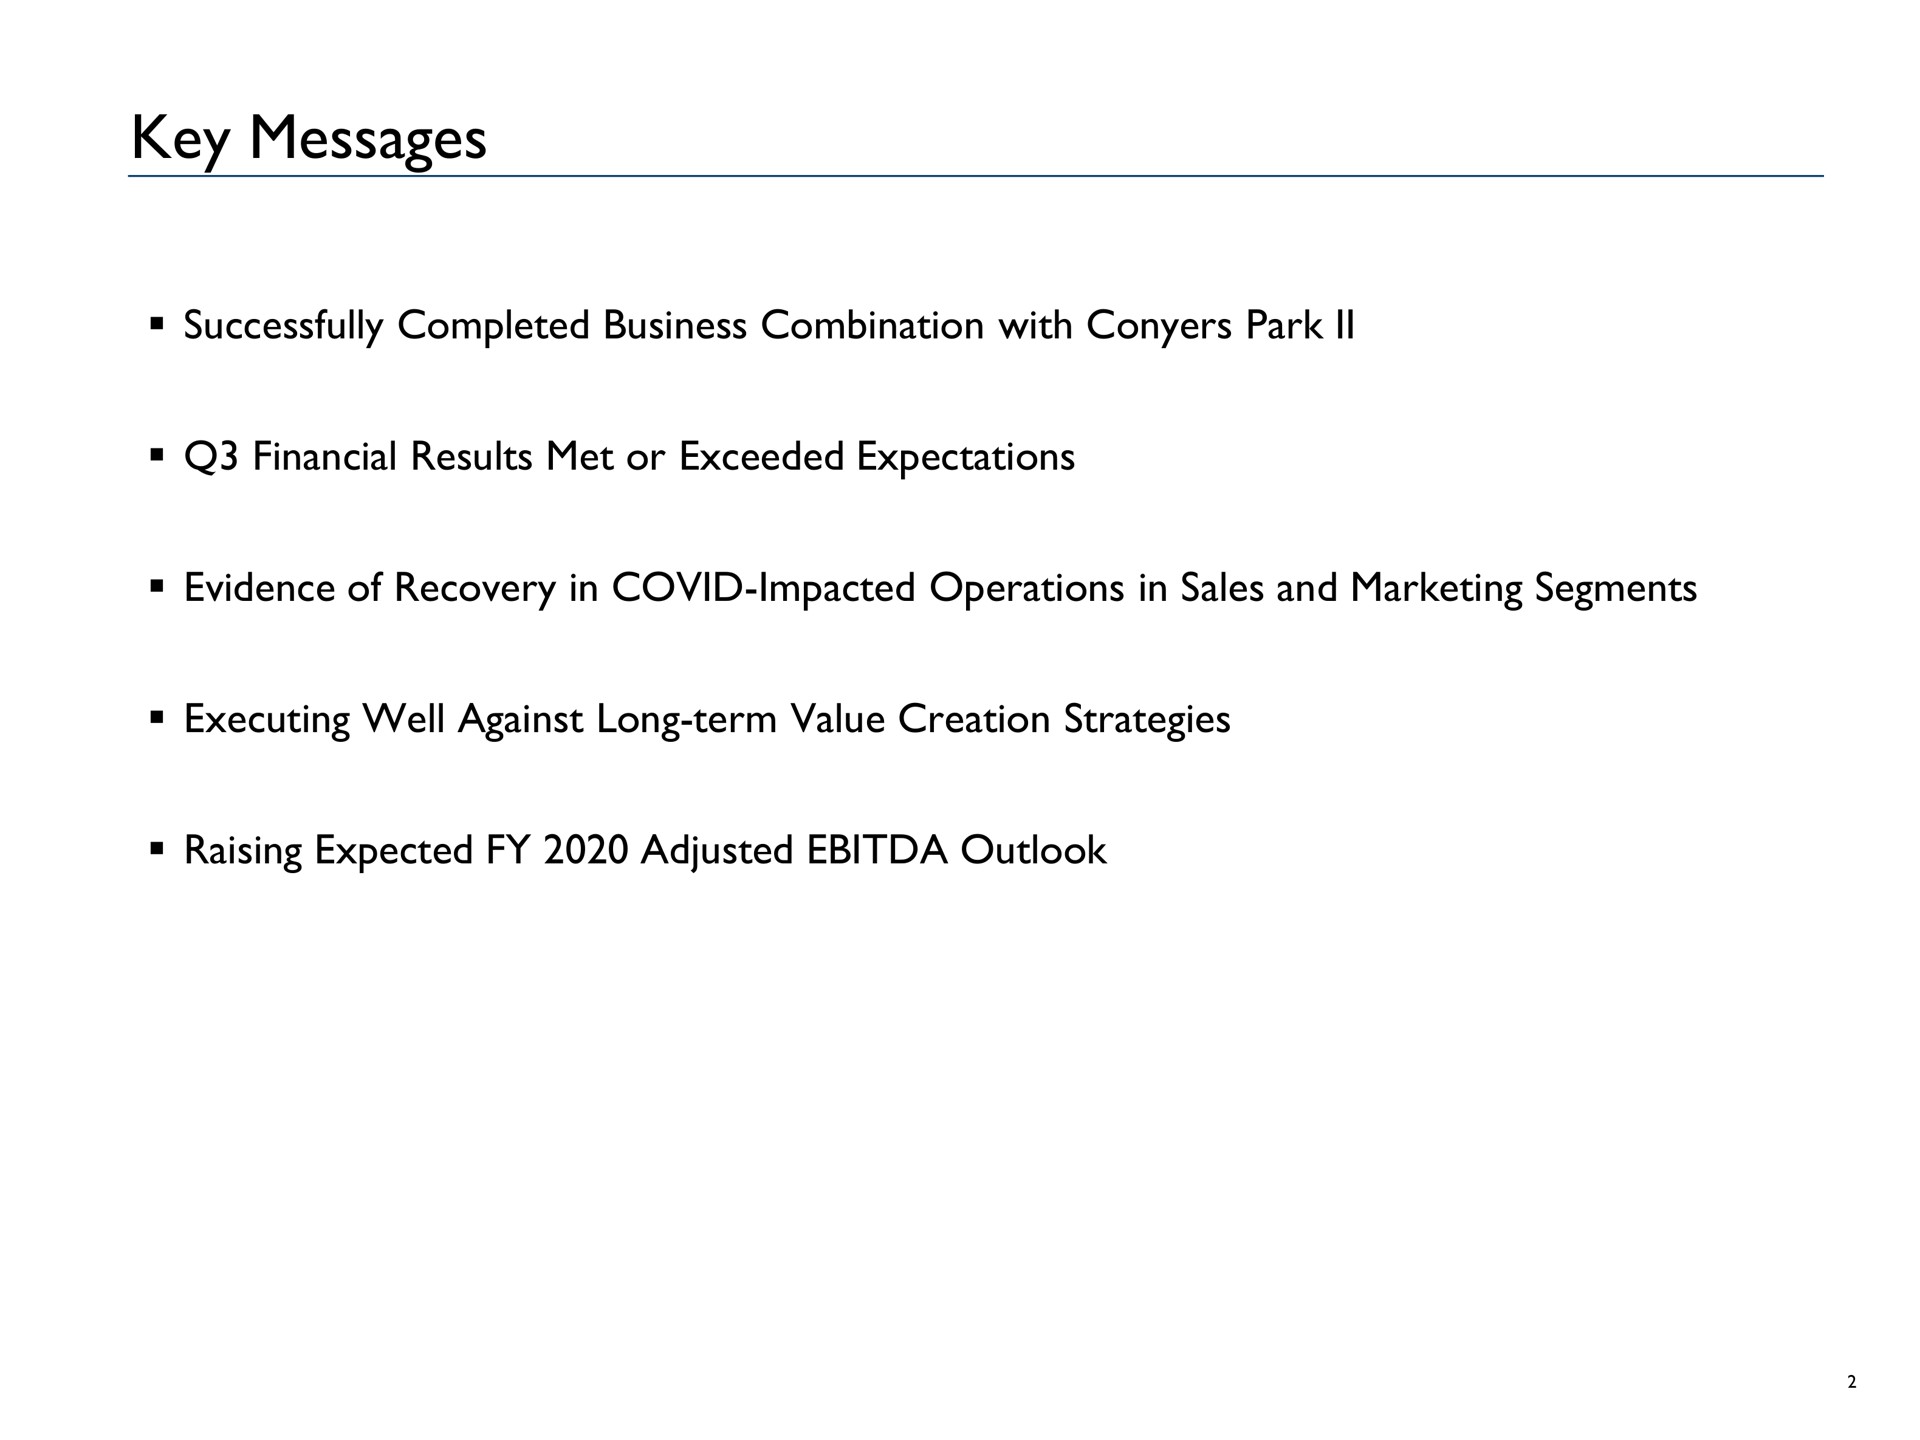 key messages successfully completed business combination with park financial results met or exceeded expectations evidence of recovery in covid impacted operations in sales and marketing segments executing well against long term value creation strategies raising expected adjusted outlook | Advantage Solutions